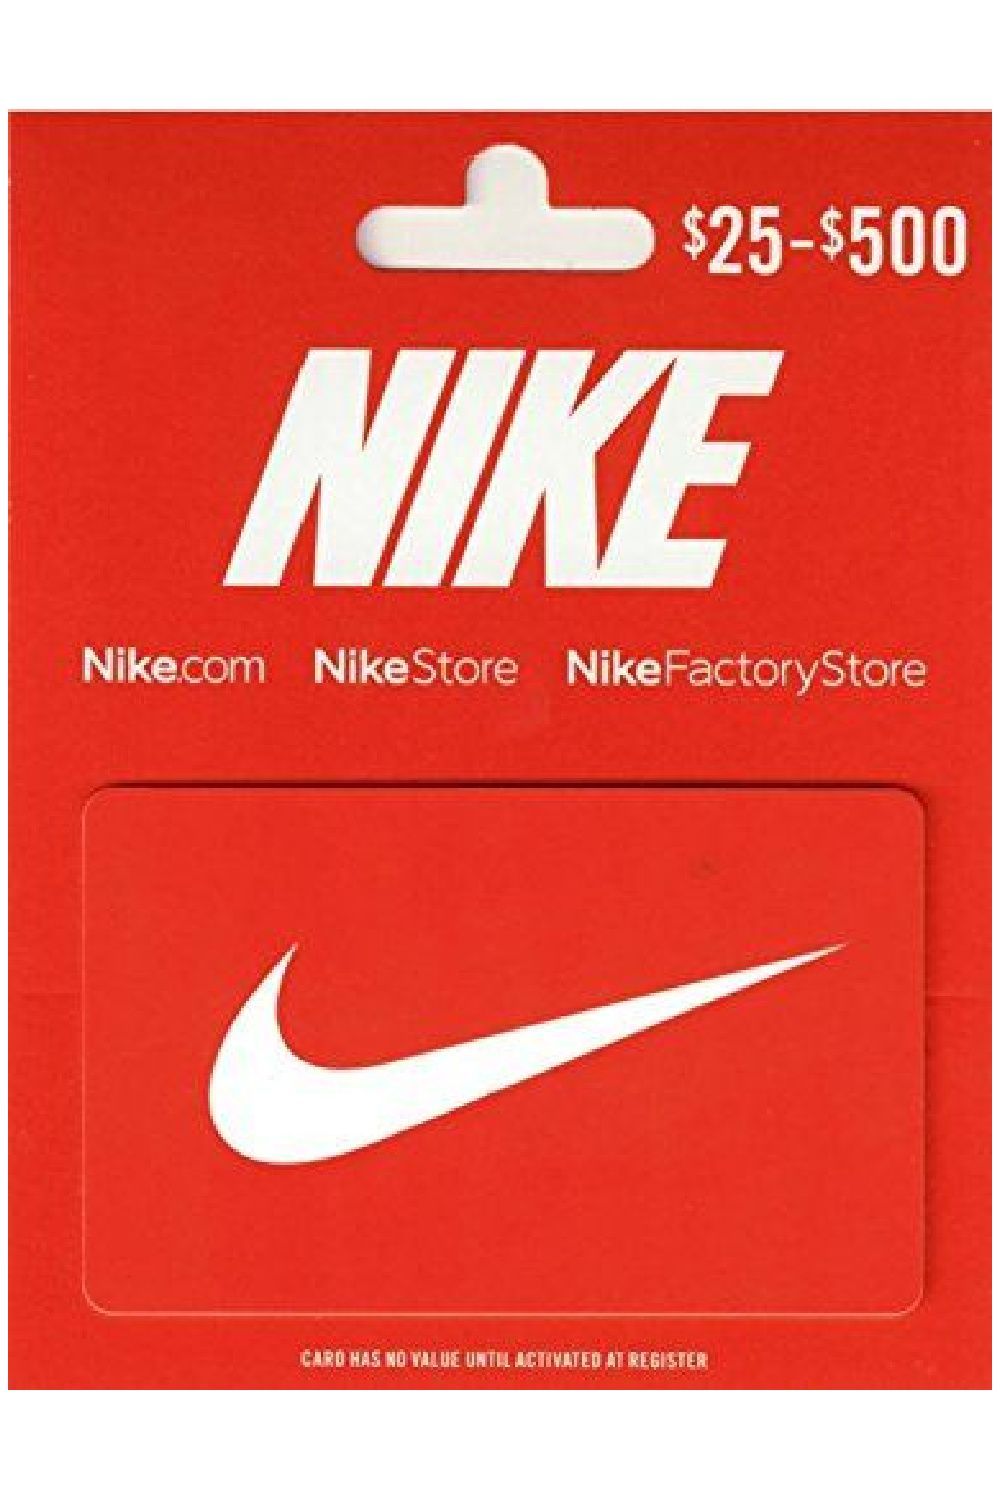 where can you spend a nike gift card